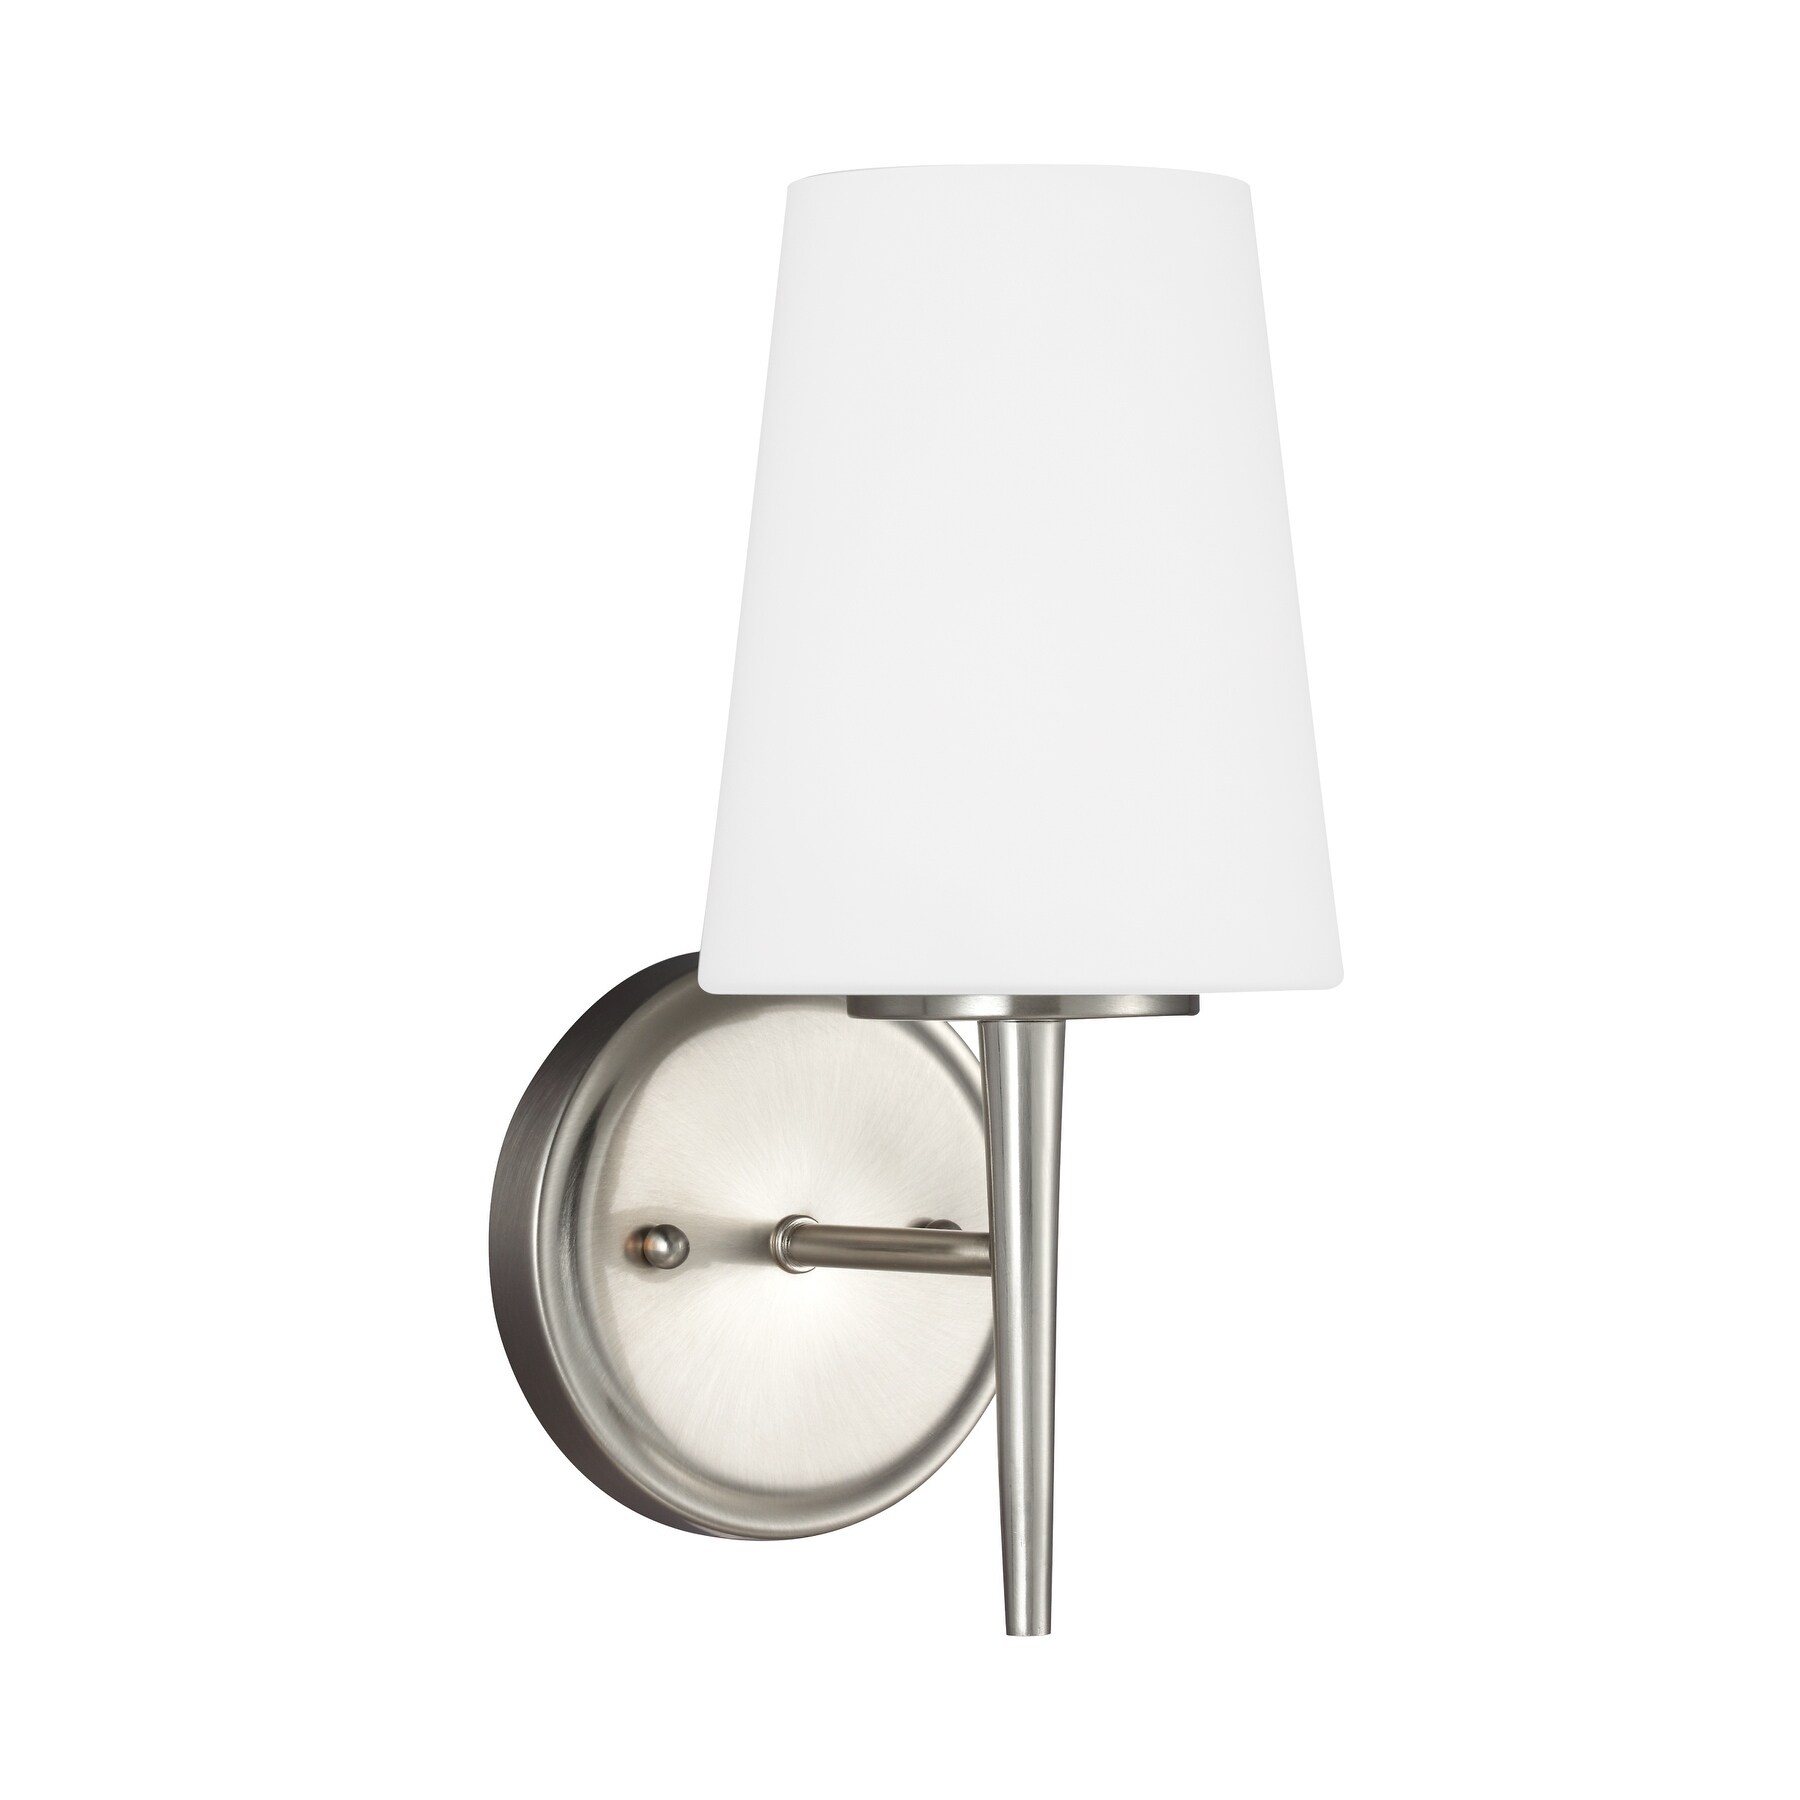 Sea Gull Driscoll Brushed Nickel 1-light Wall/Bath Sconce